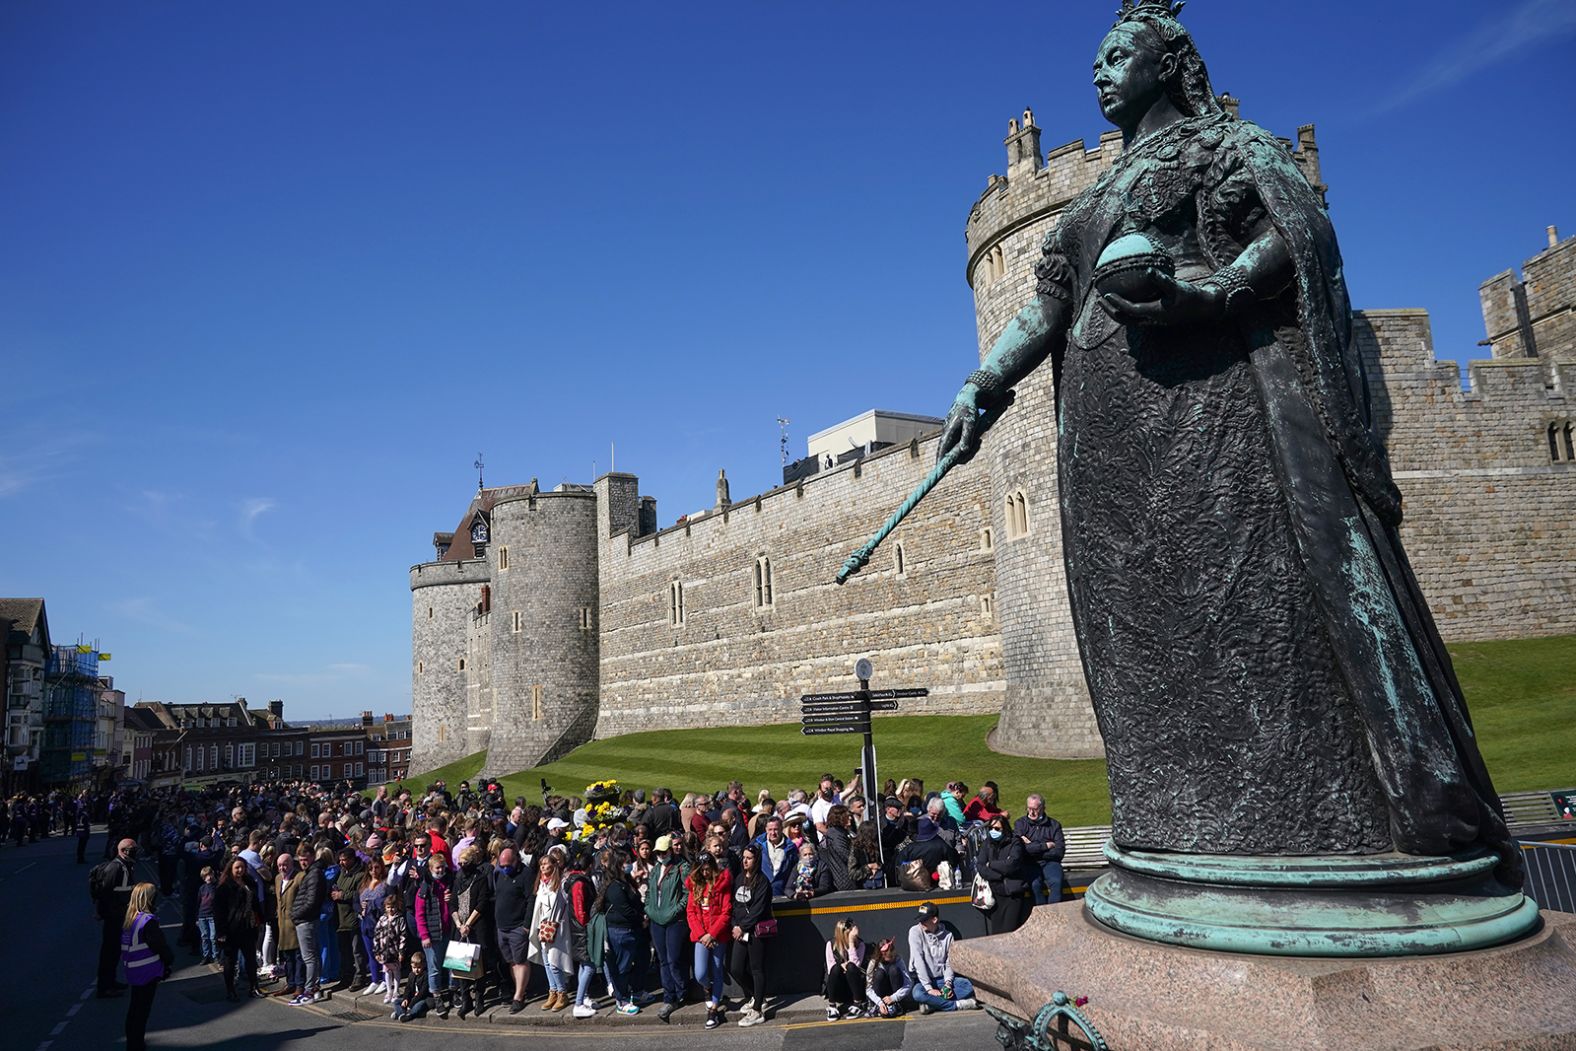 A crowd gathers near the Queen Victoria statue for a two-minute silence outside Windsor Castle during the funeral of Prince Philip.